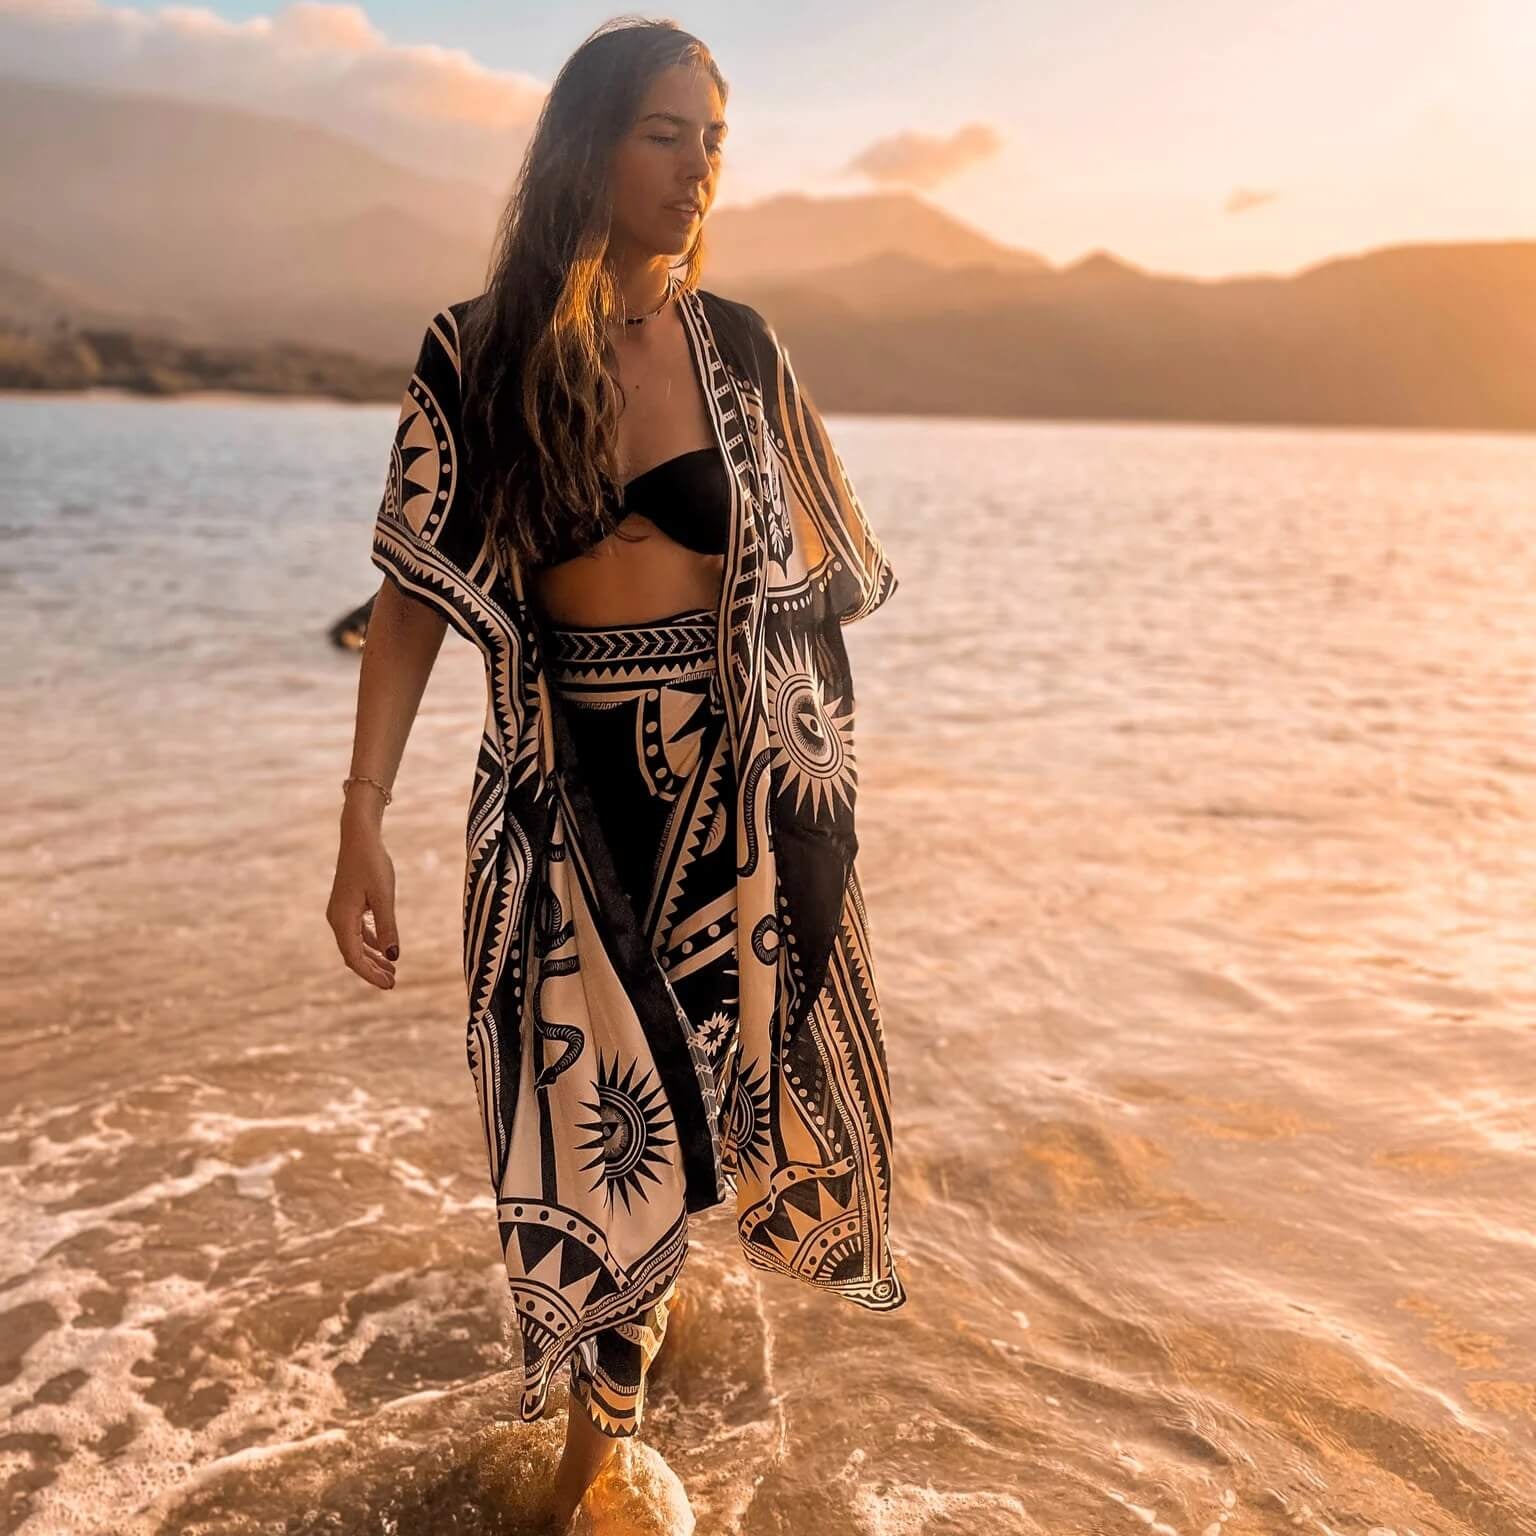 The designer of PLISSE, Paloma wearing the nazar kimono and wrap skirt. She is posing in the water at a beach during golden hour. This is the front of this flowy kimono.